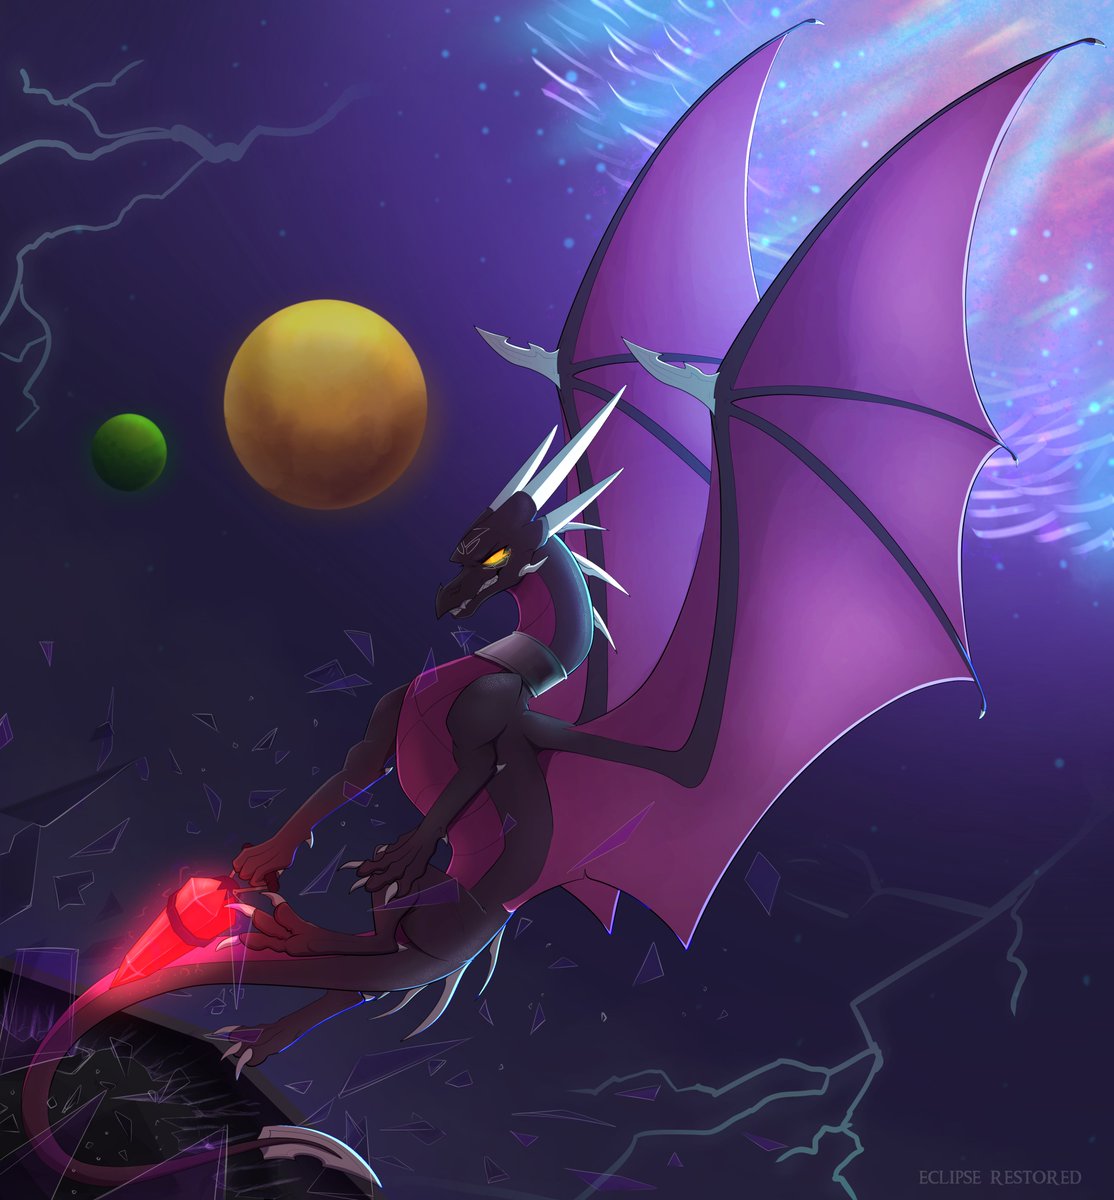 'It's sad it must end this way... Now where was I?' >:) #Cynder #SpyroTheDragon